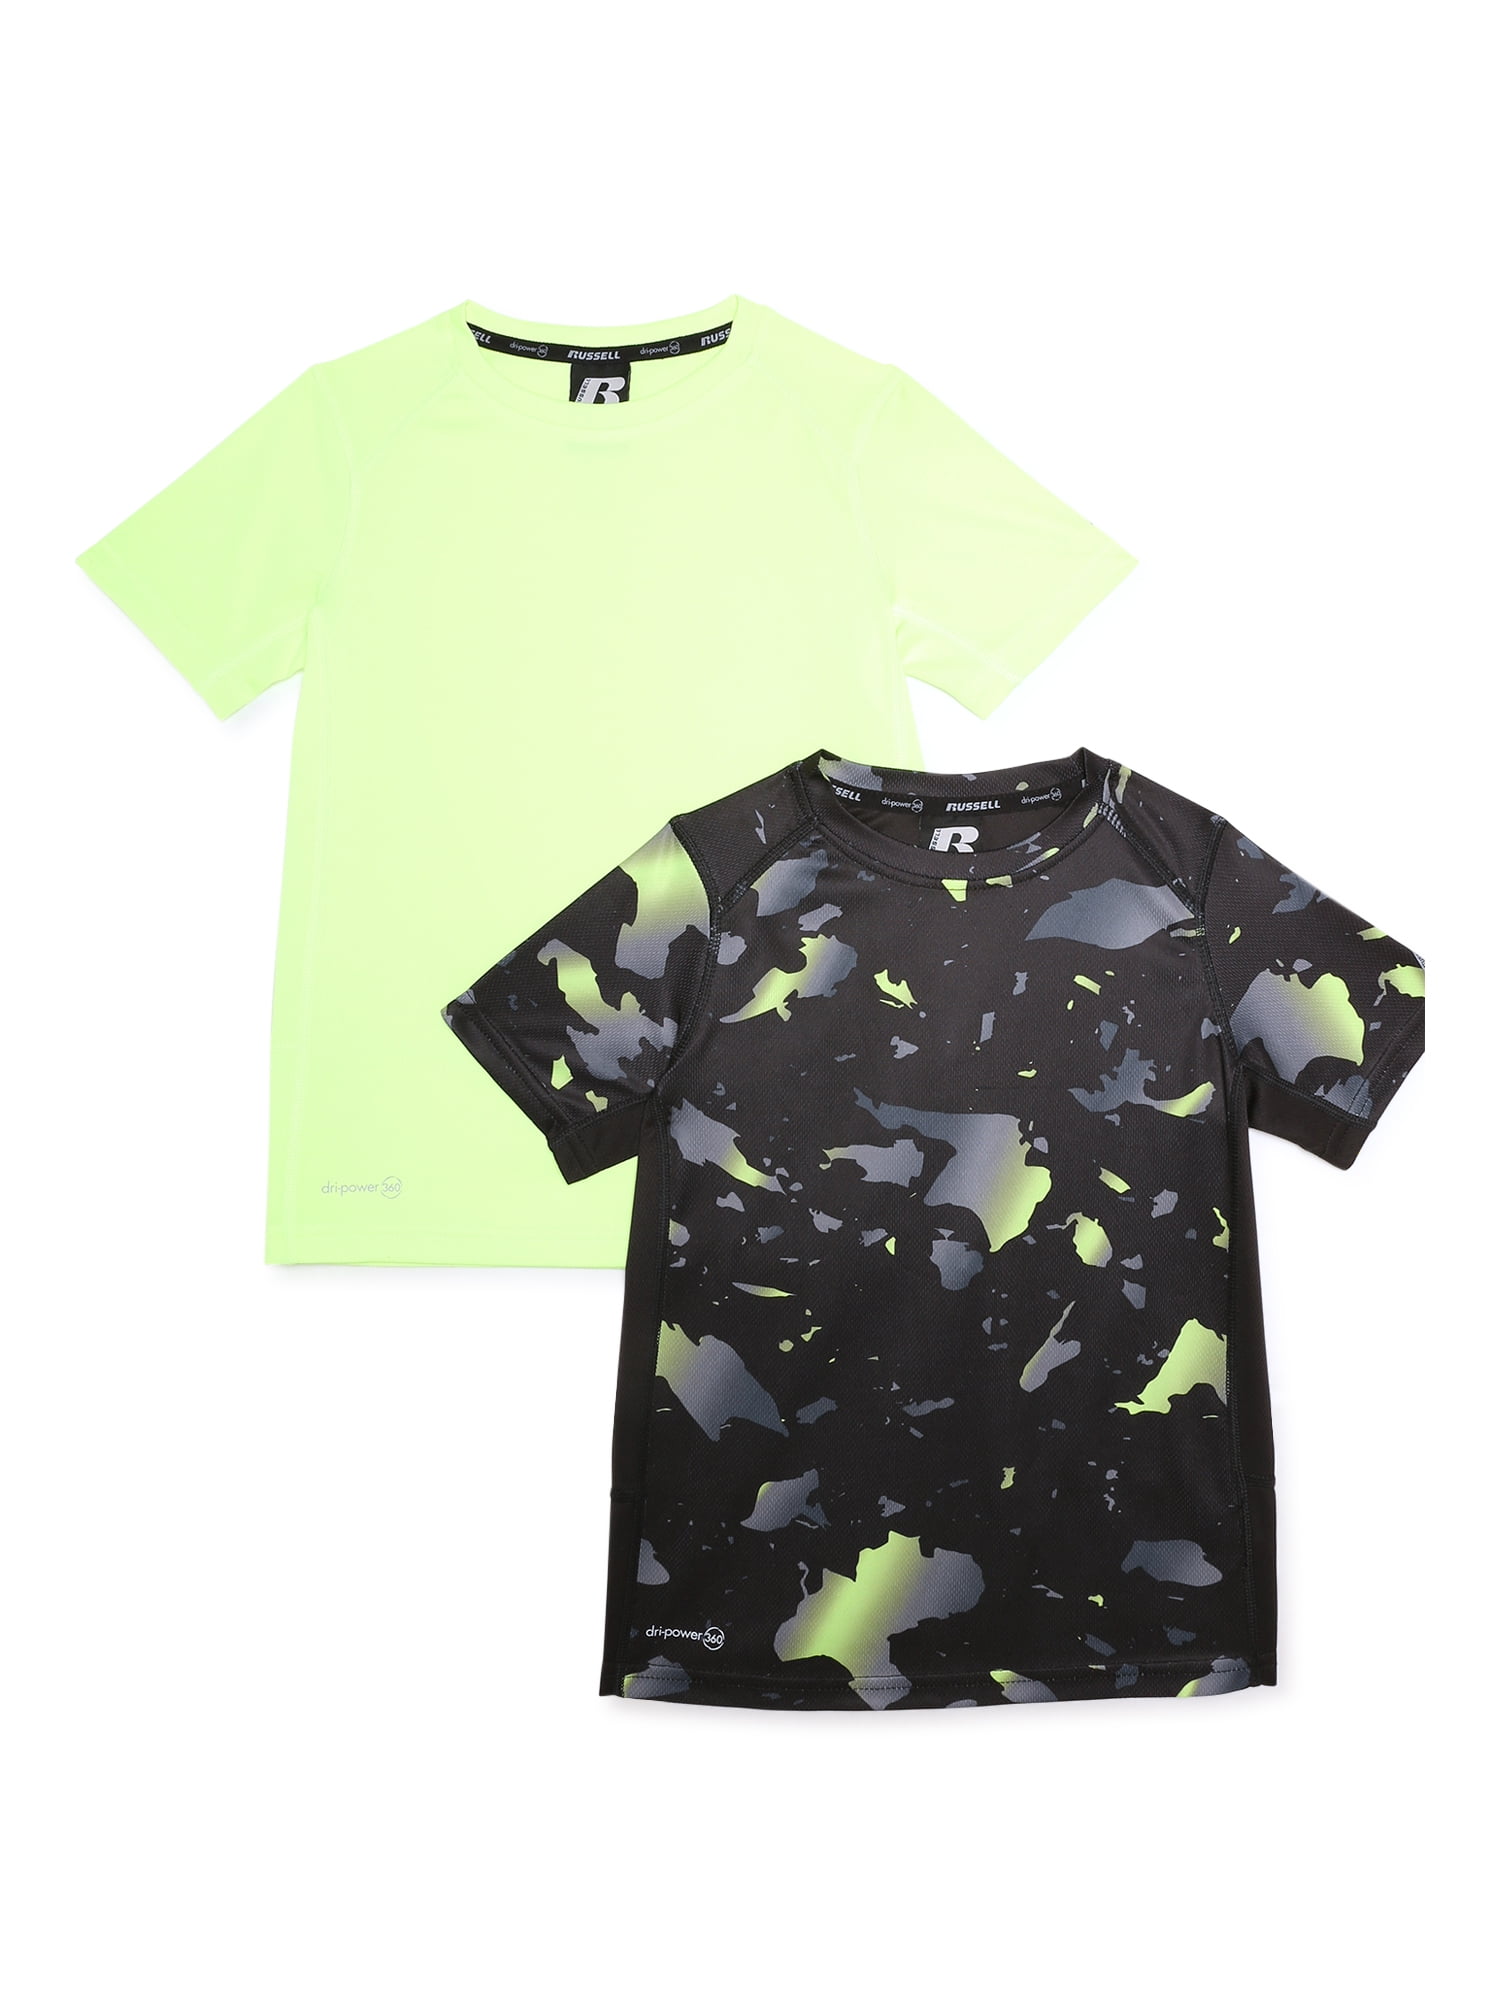 Russell Boys Printed and Solid Short Sleeve T-Shirts, 2-Pack, Sizes 4-18 -  Walmart.com